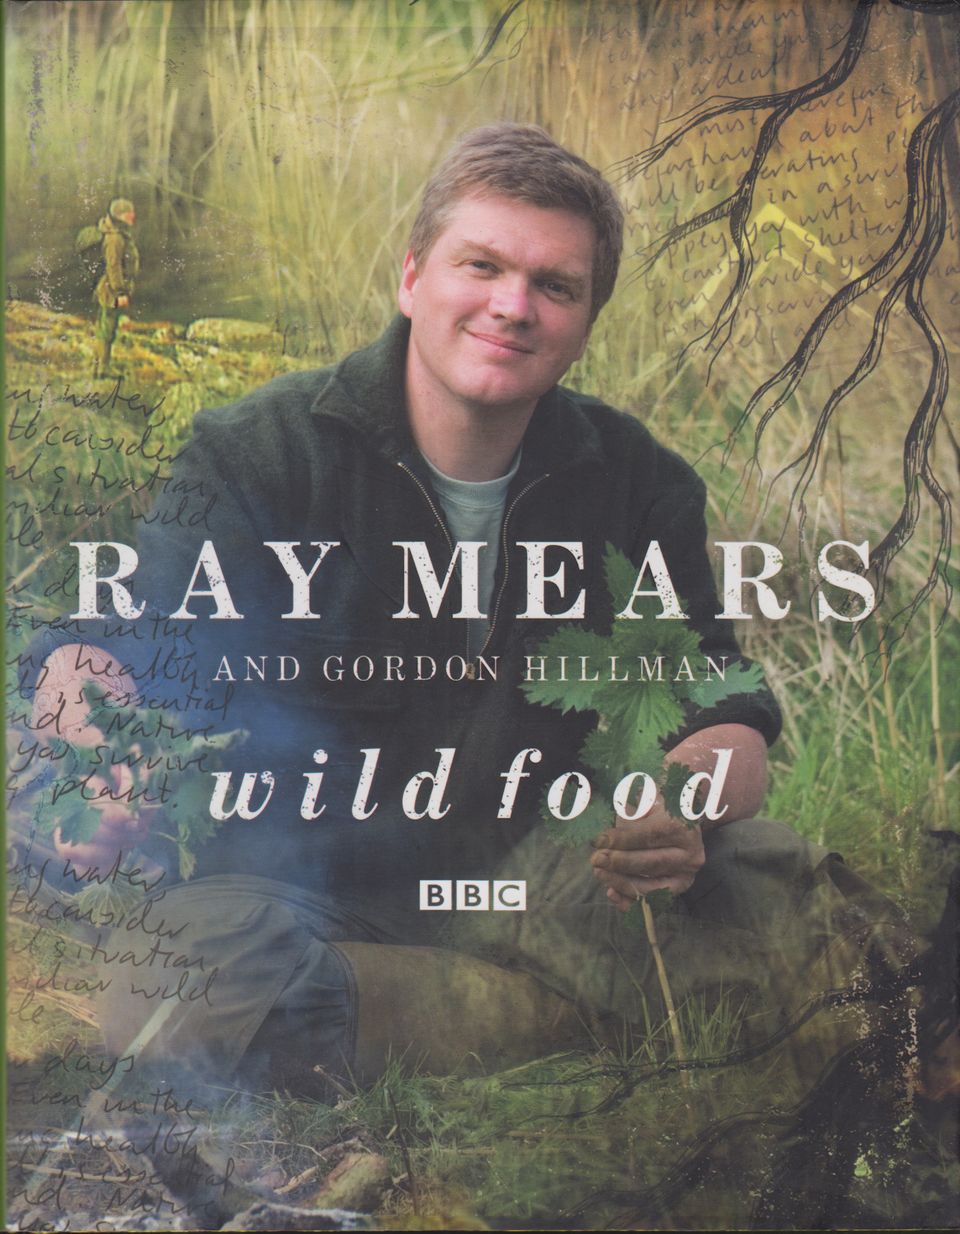 WILD FOOD. By Ray Mears and Gordon Hillman. - Mears (Ray) and Hillman (Gordon).